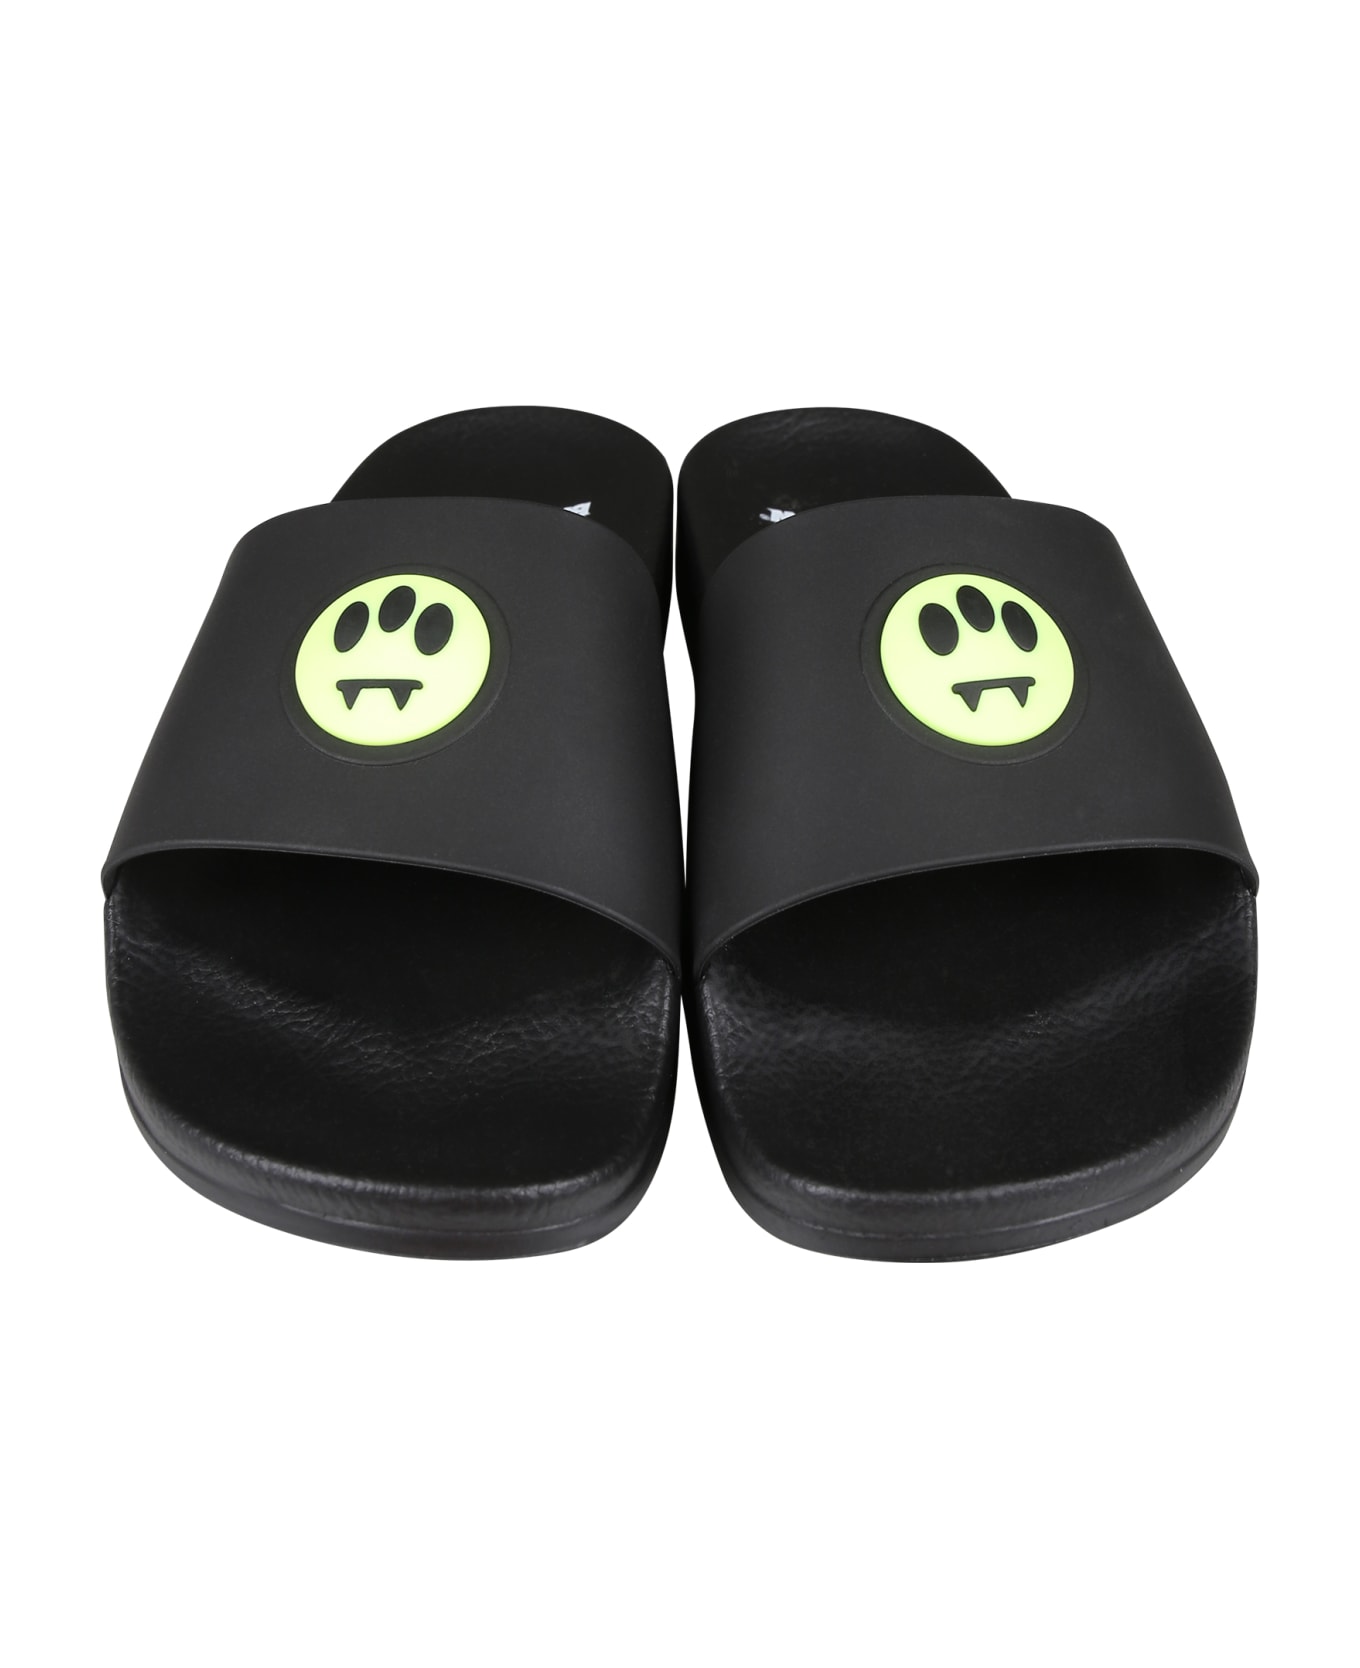 Barrow Black Slippers For Boy With Smiley - Black